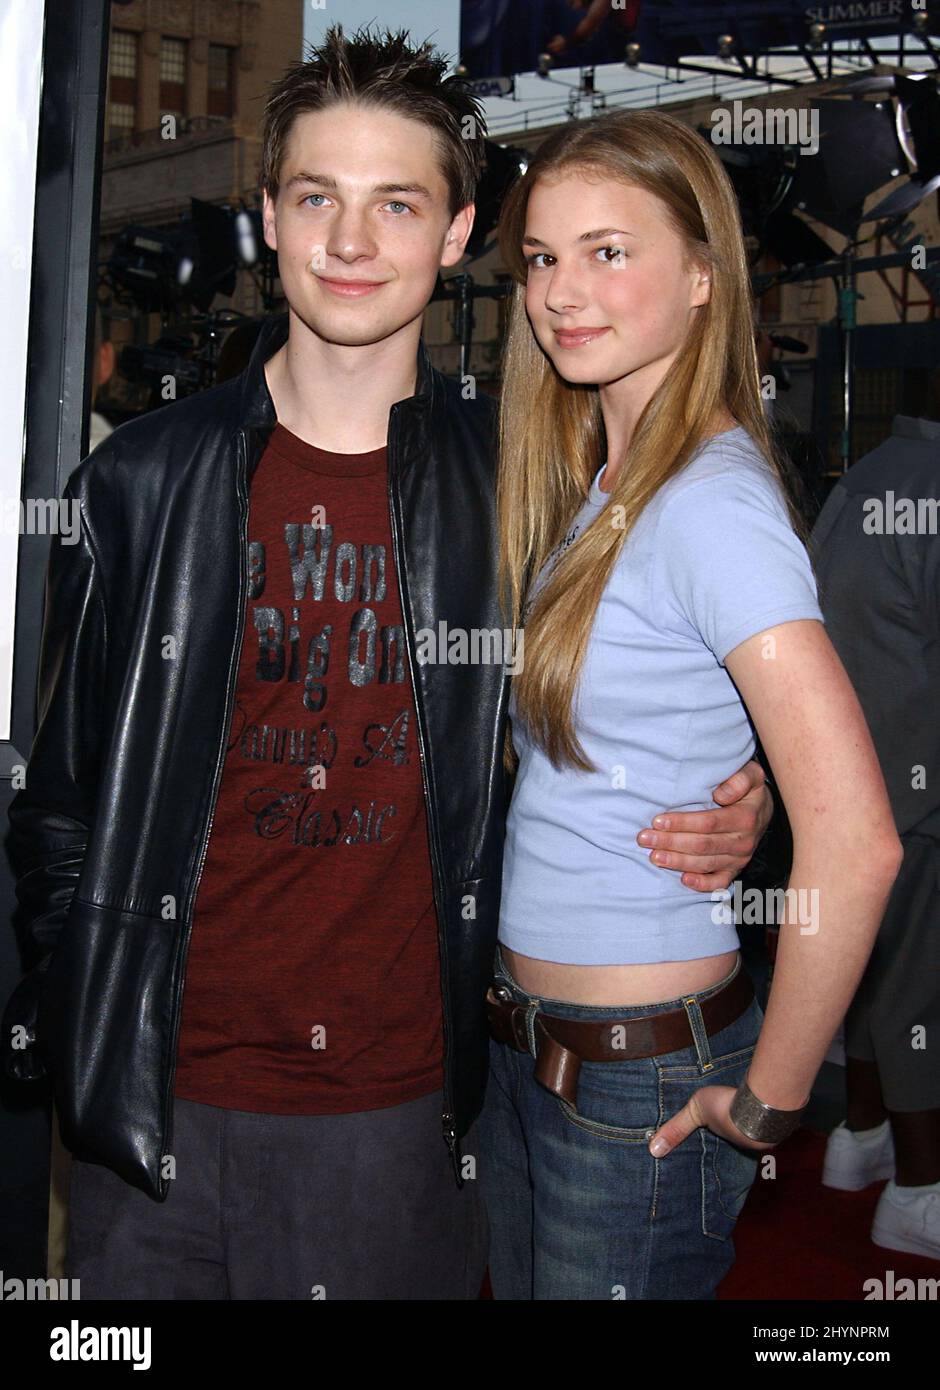 GREGORY SMITH & EMILY VAN CAMP ATTEND THE MALIBU'S MOST WANTED FILM PREMIERE IN HOLLYWOOD PICTURE: UK PRESS Stock Photo